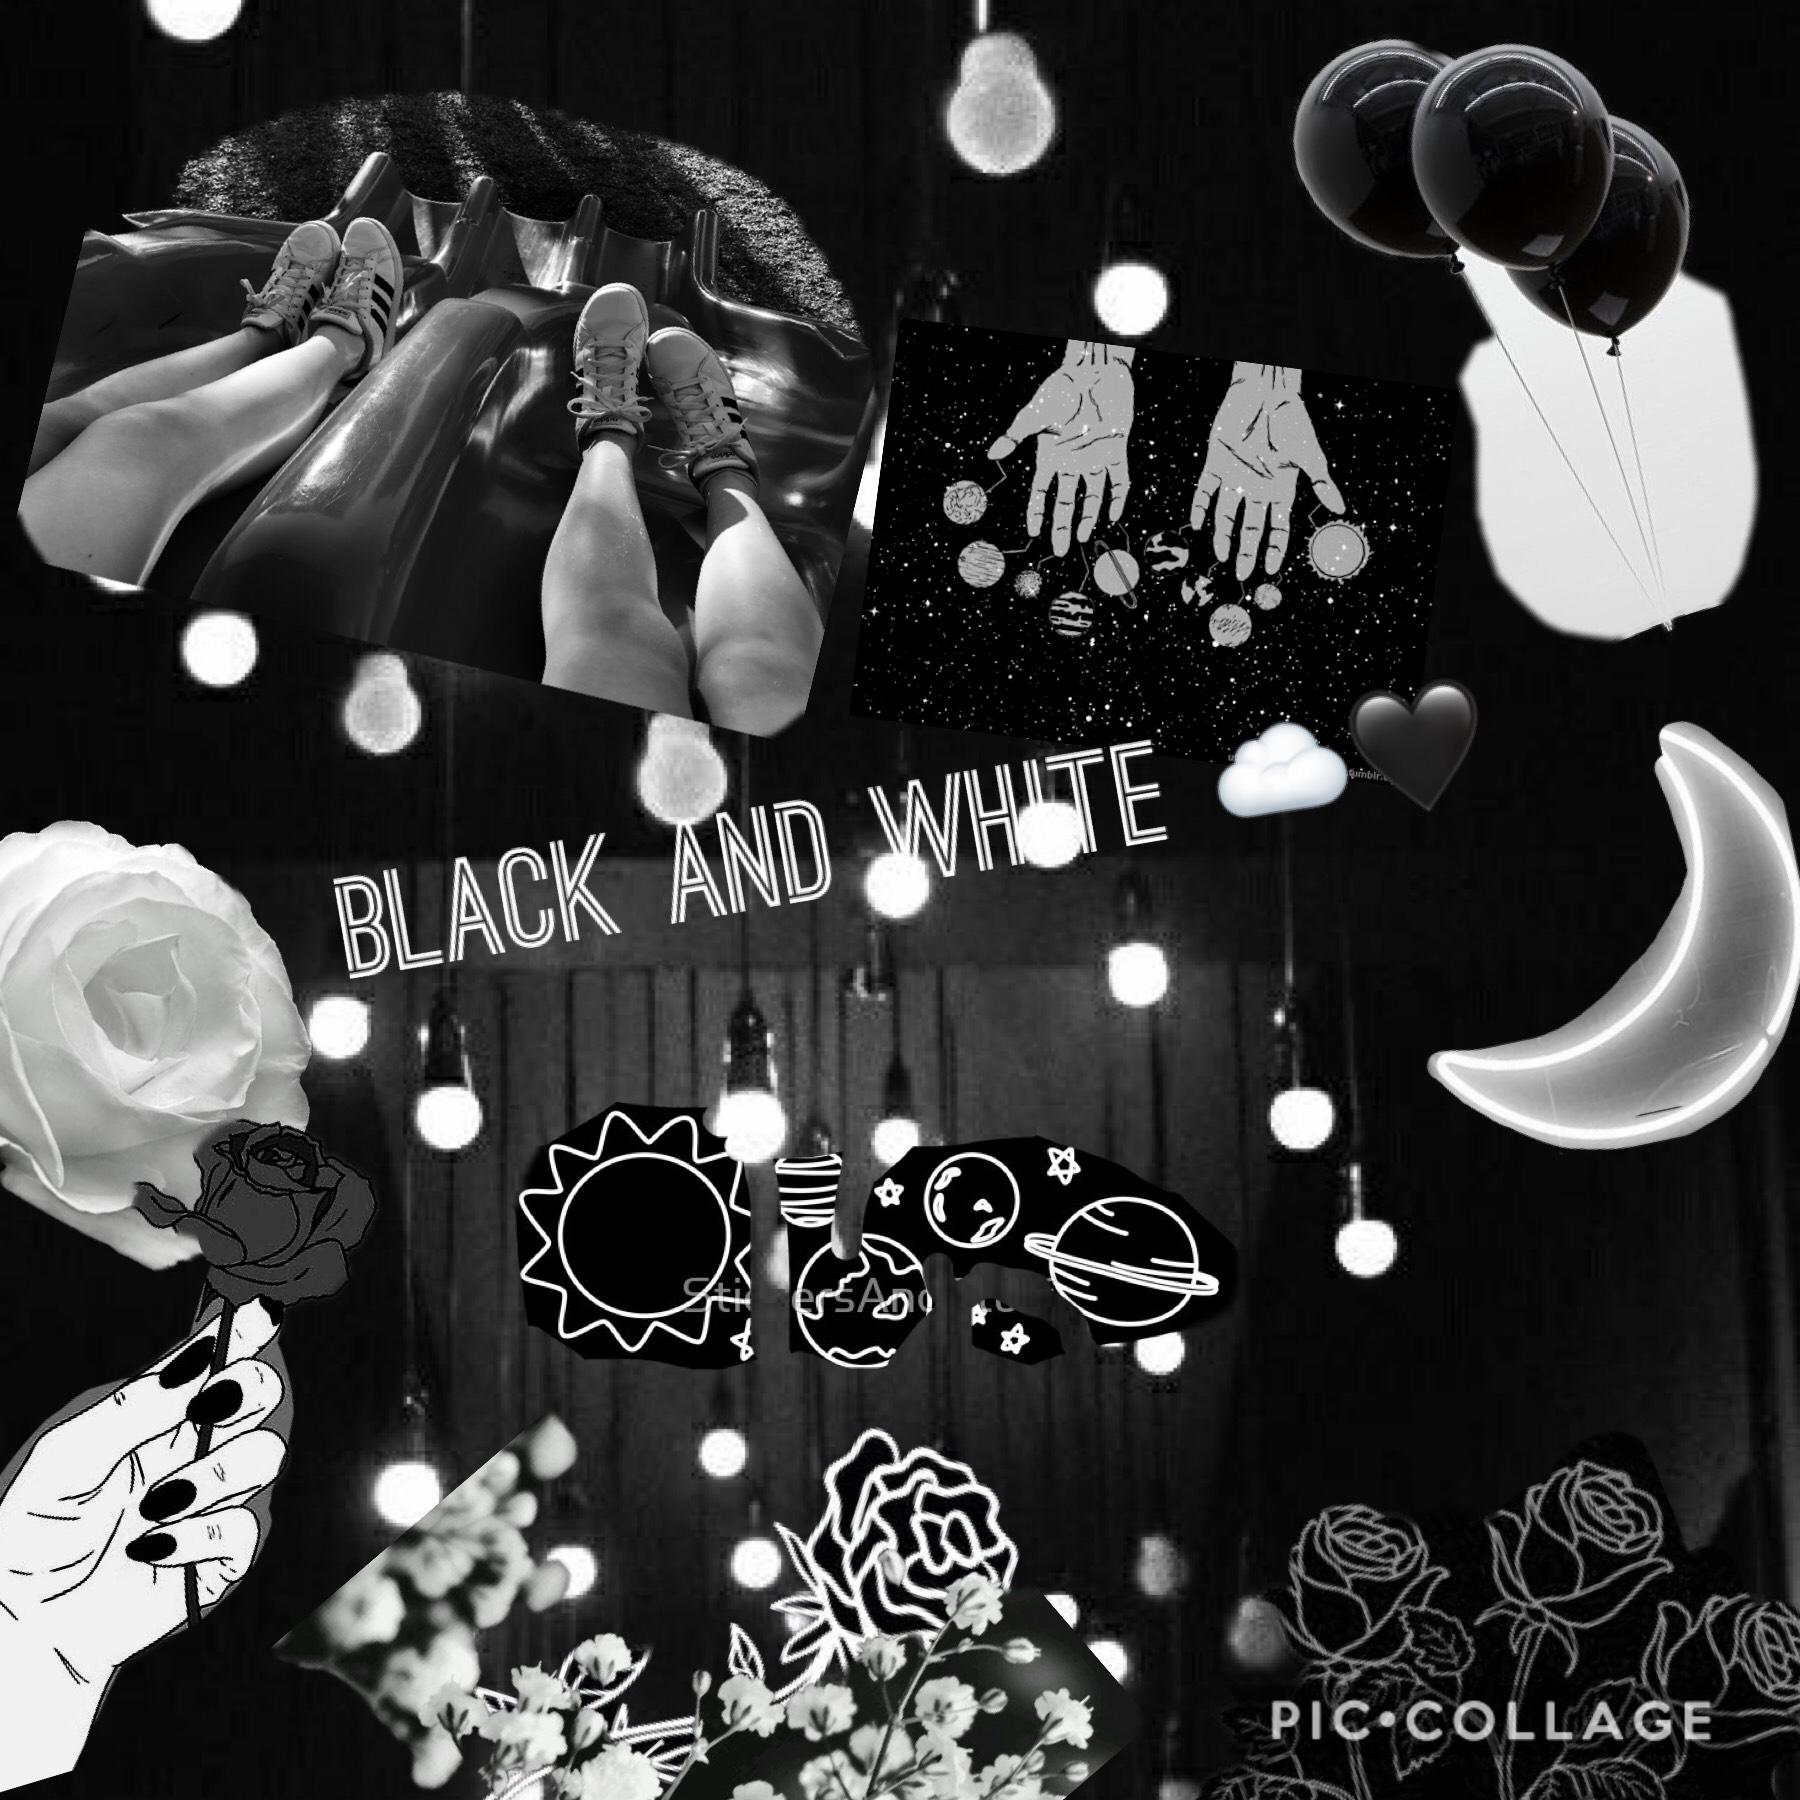 Black and white aesthetic tap
the challenge isn’t working out I guess no one seems to be entering .... it’s DUE tmr!!! 